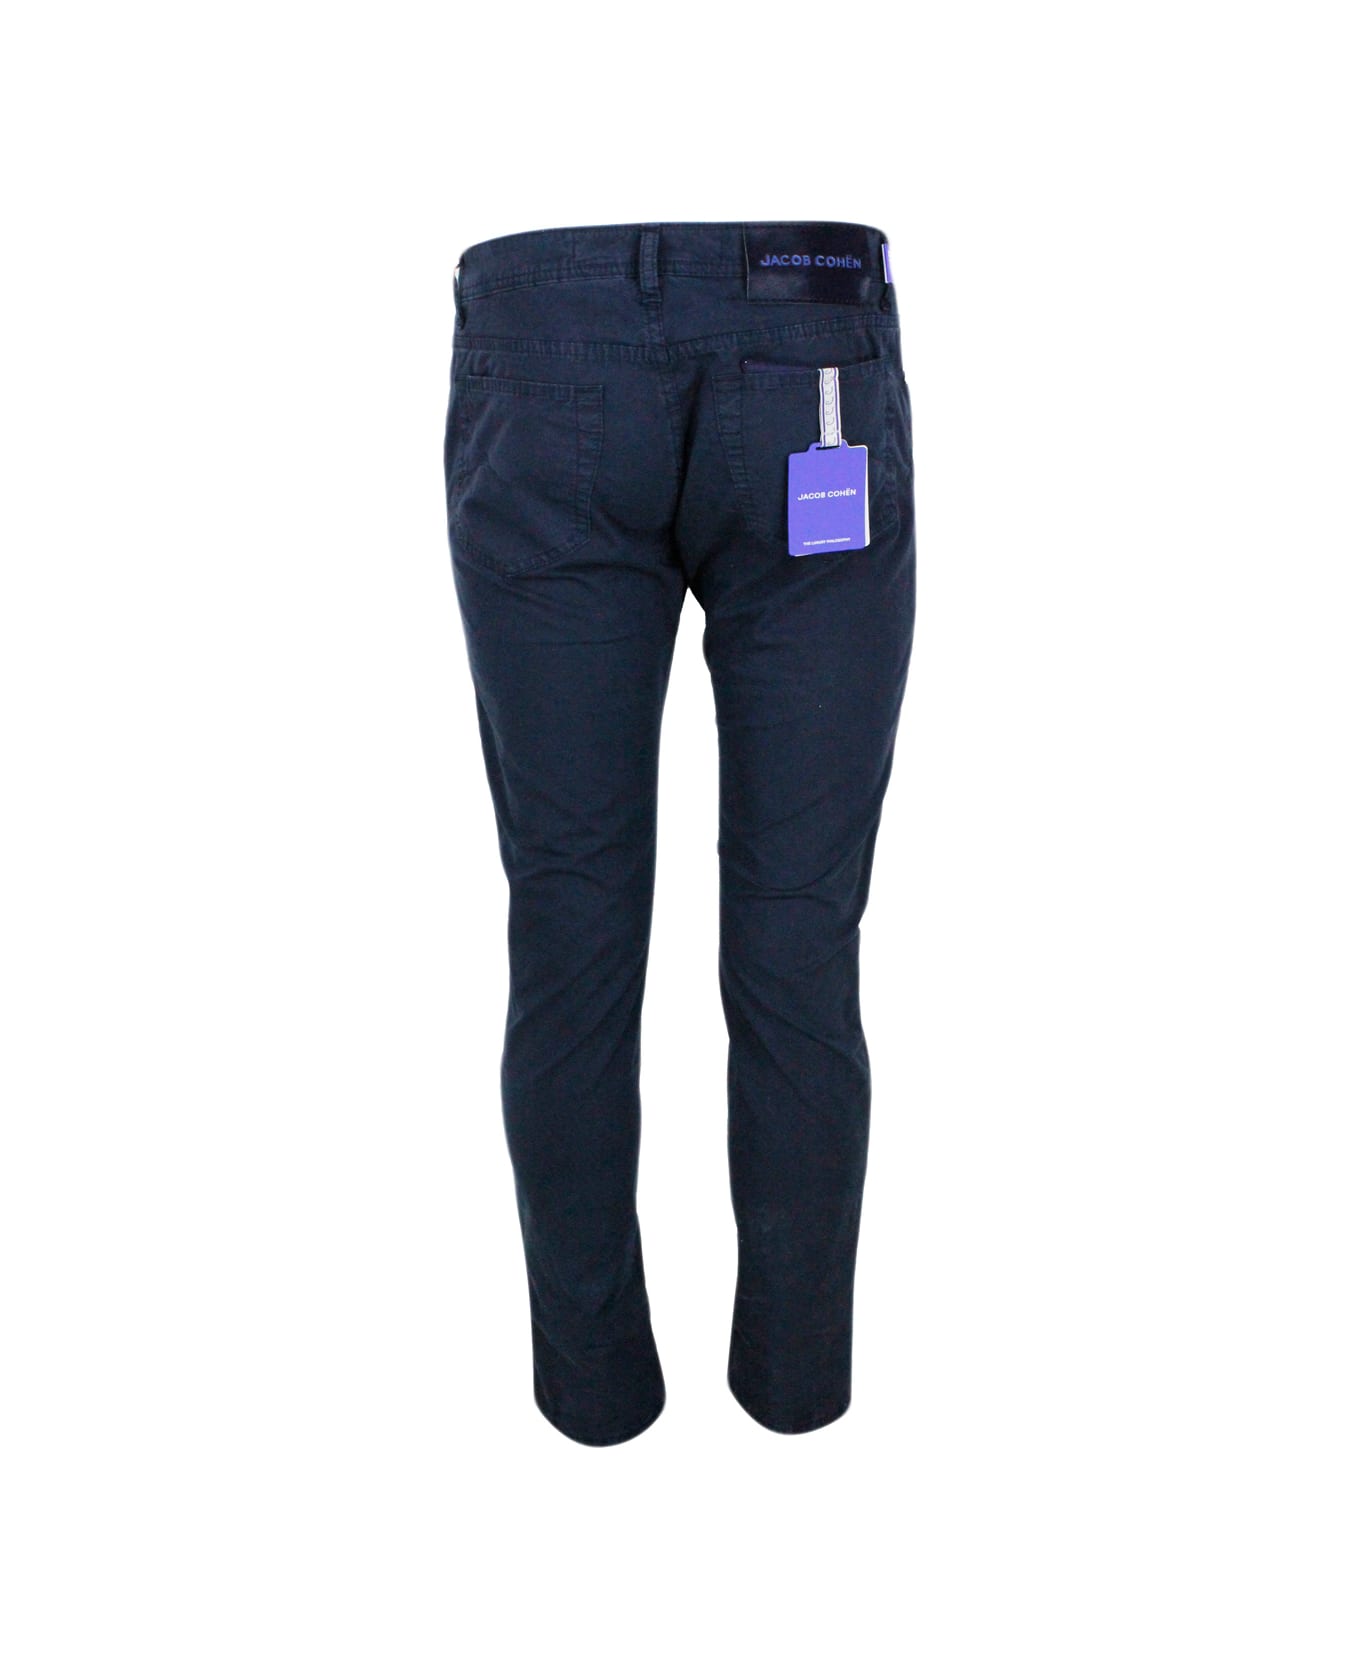 Jacob Cohen Bard J688 Luxury Edition Trousers In Soft Stretch Cotton With 5 Pockets With Closure Buttons And Lacquered Button And Pony Skin Tag With Logo - Blu